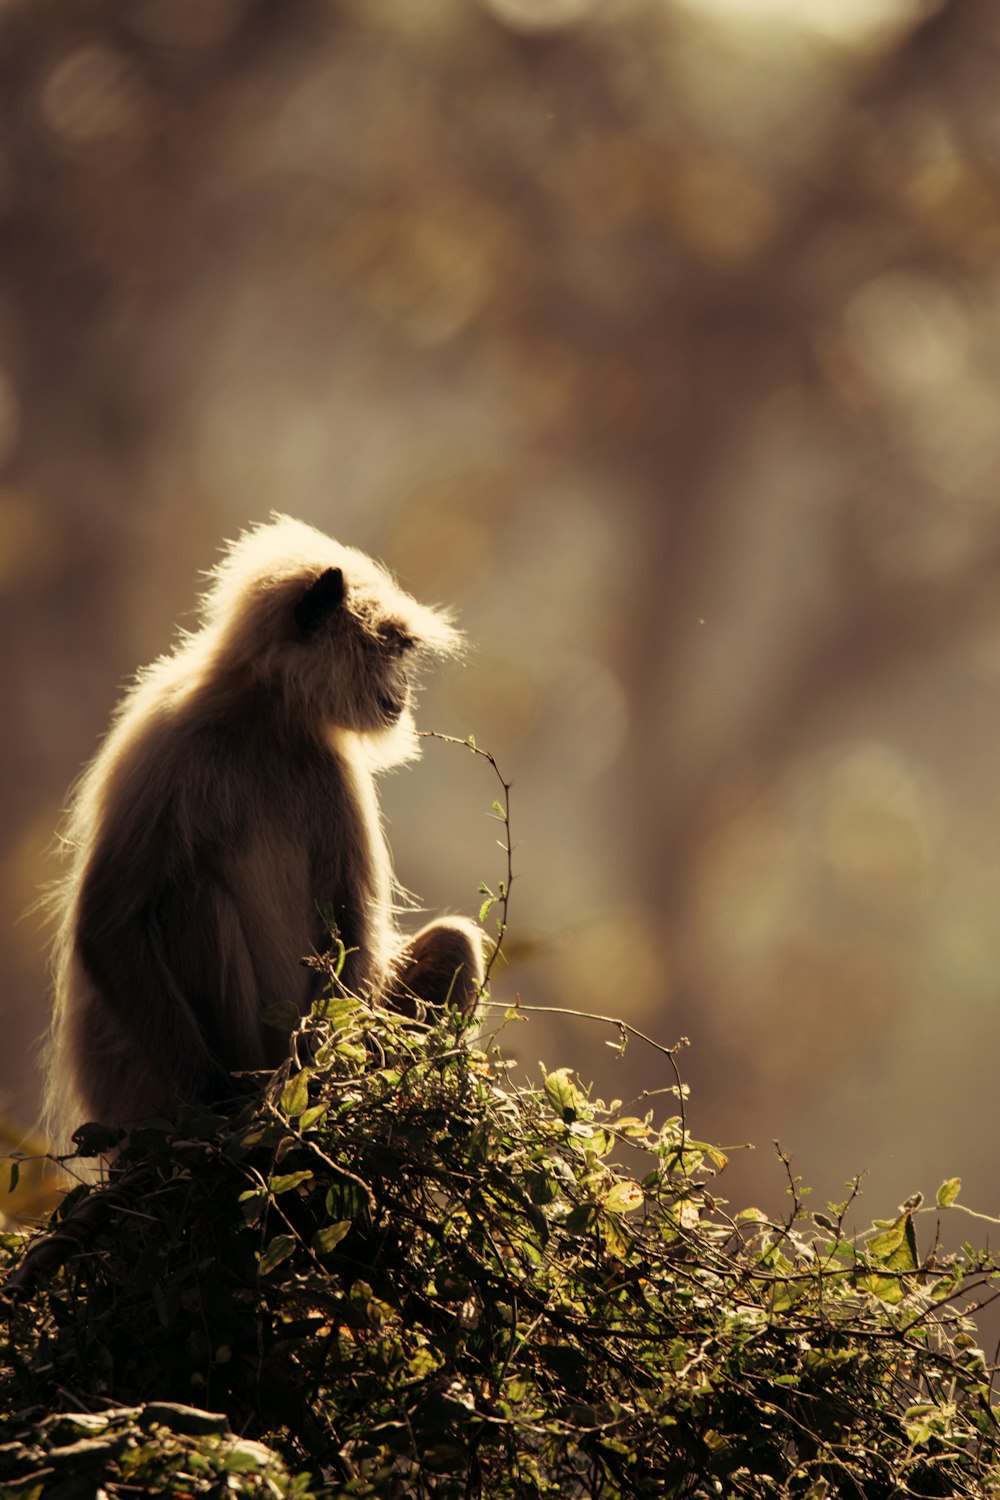 a monkey sitting on top of a pile of grass